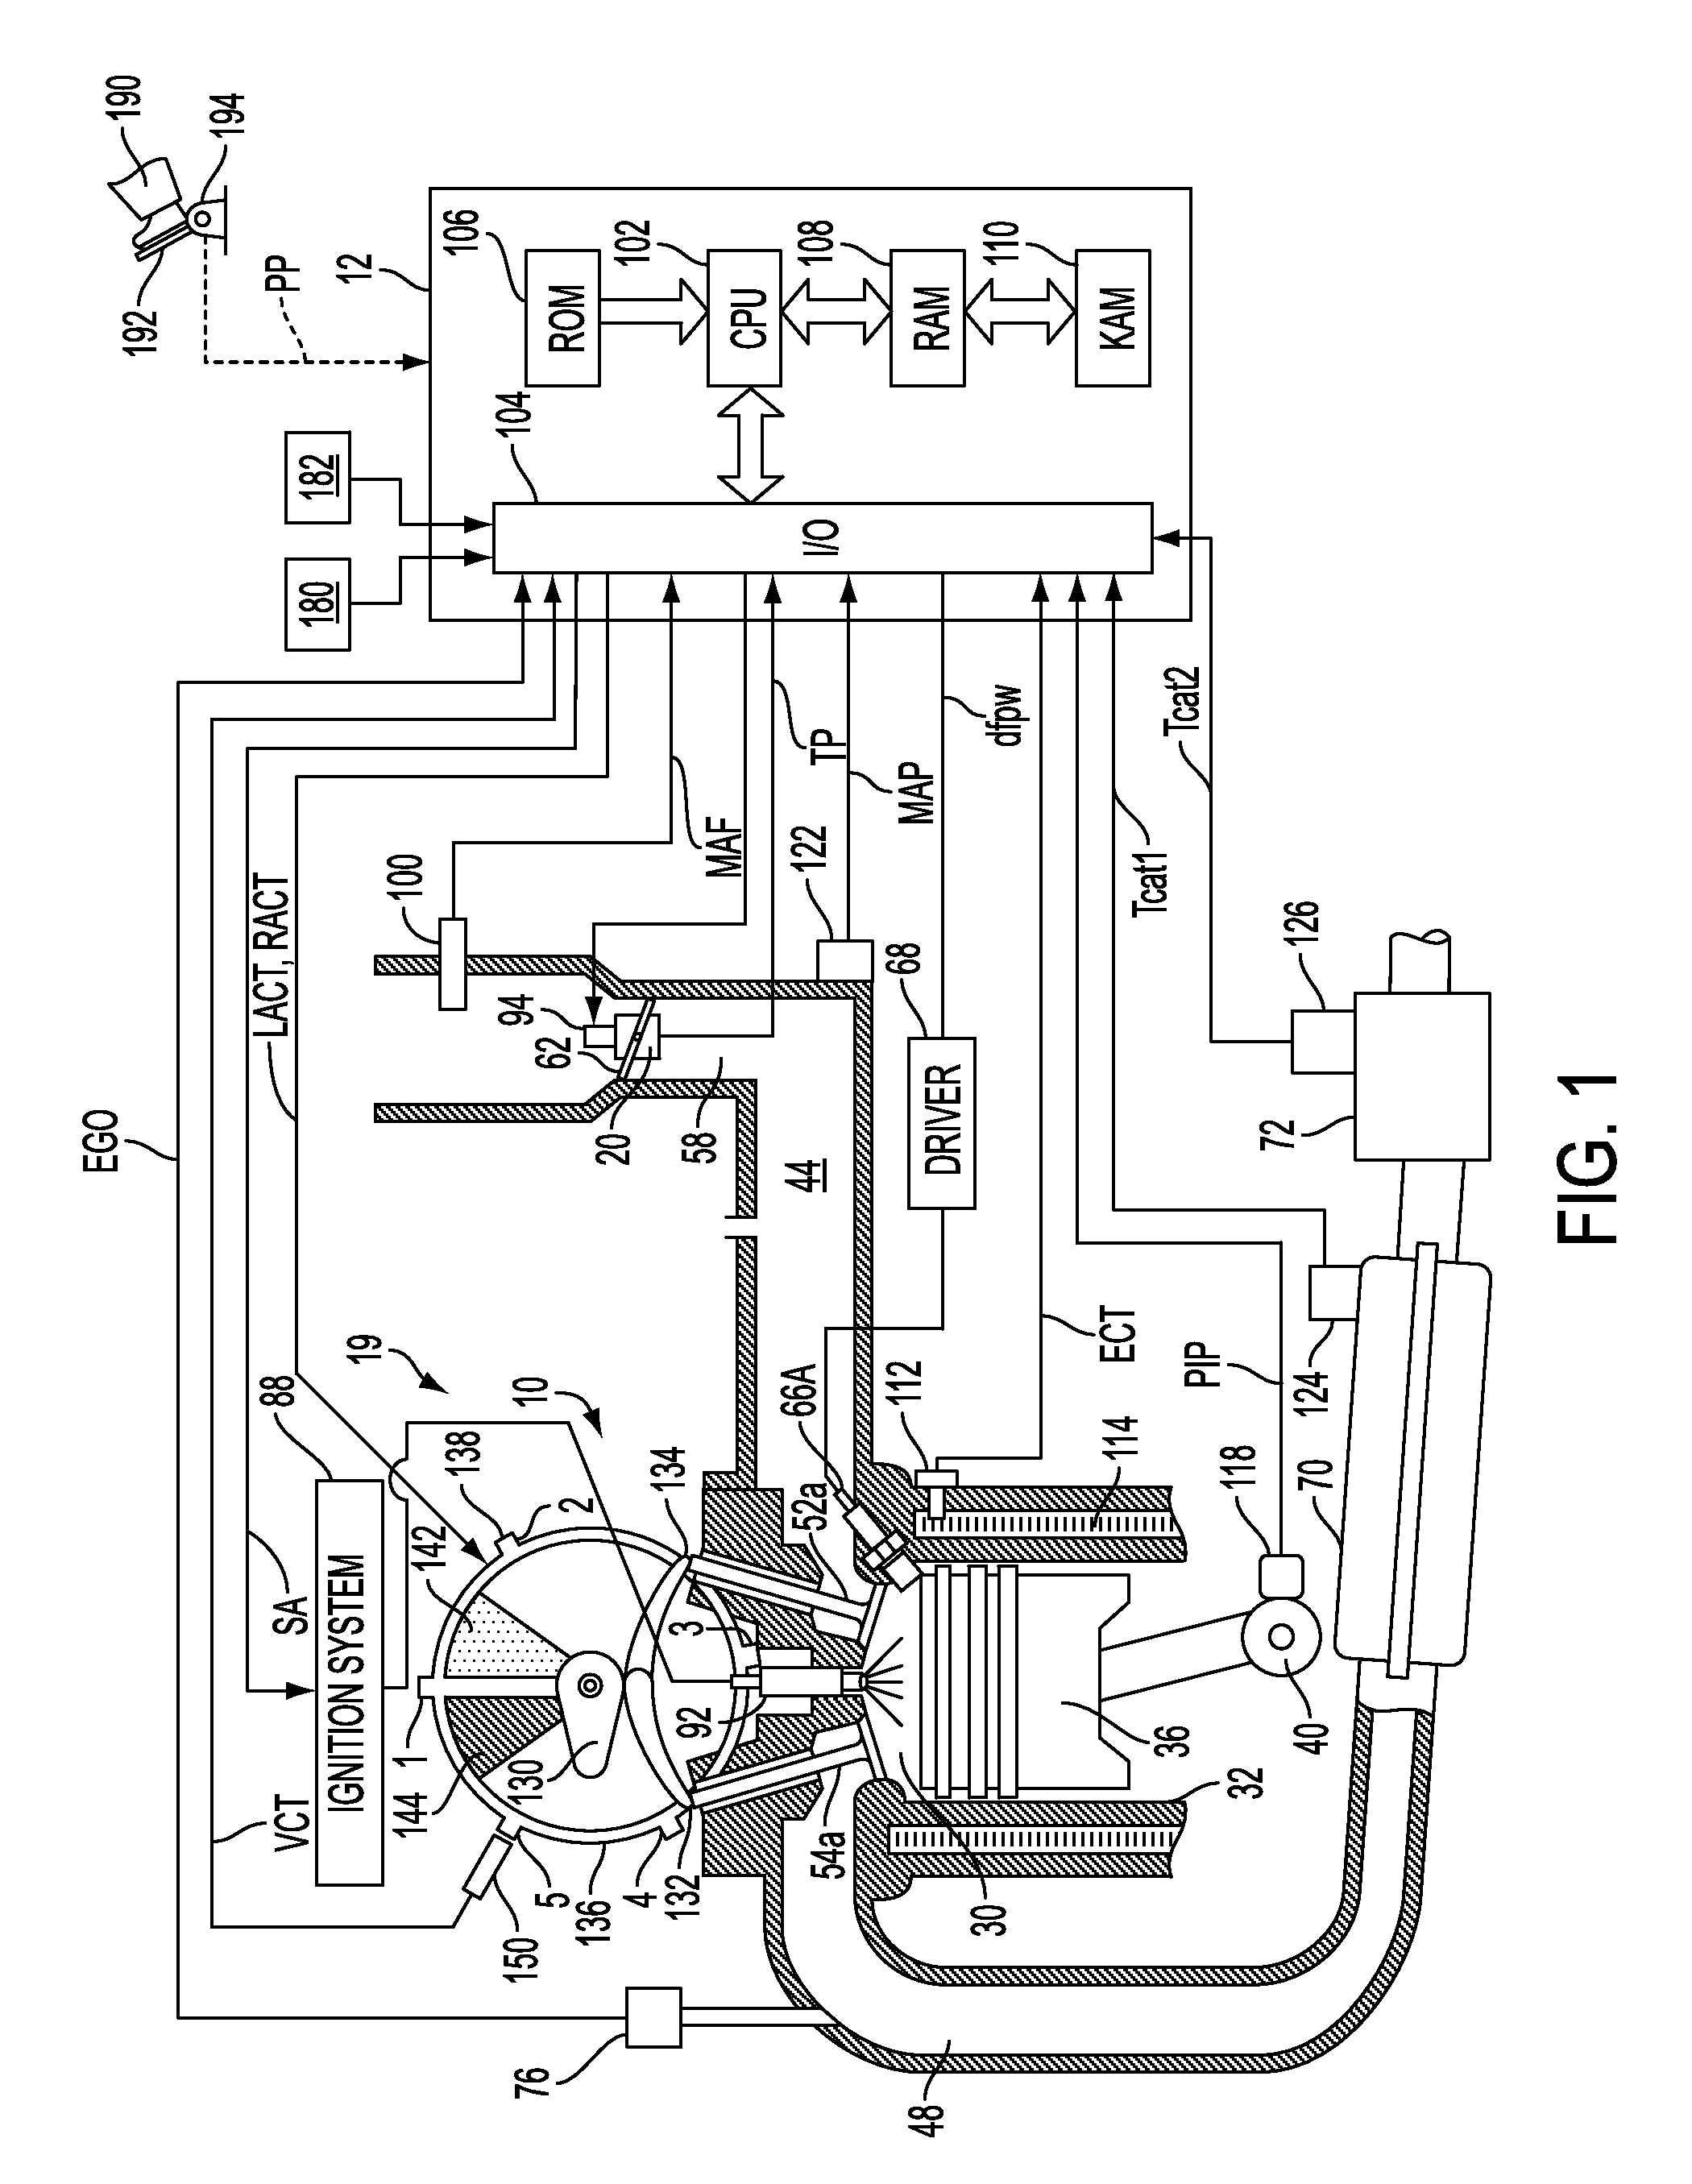 Method and system for variable cam timing device